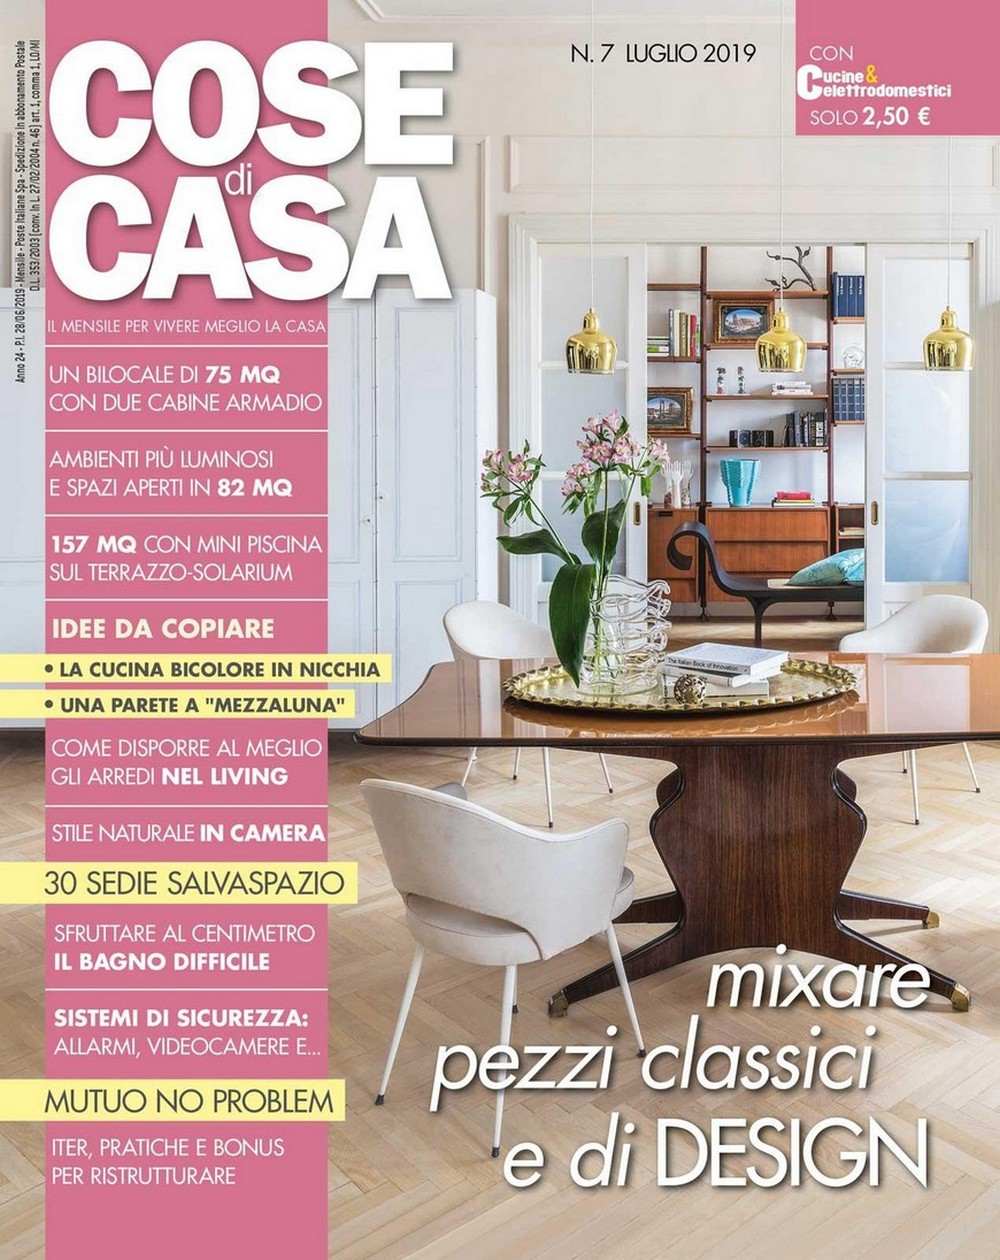 Design Your Home With The Best Interior Design Magazines At Cersaie